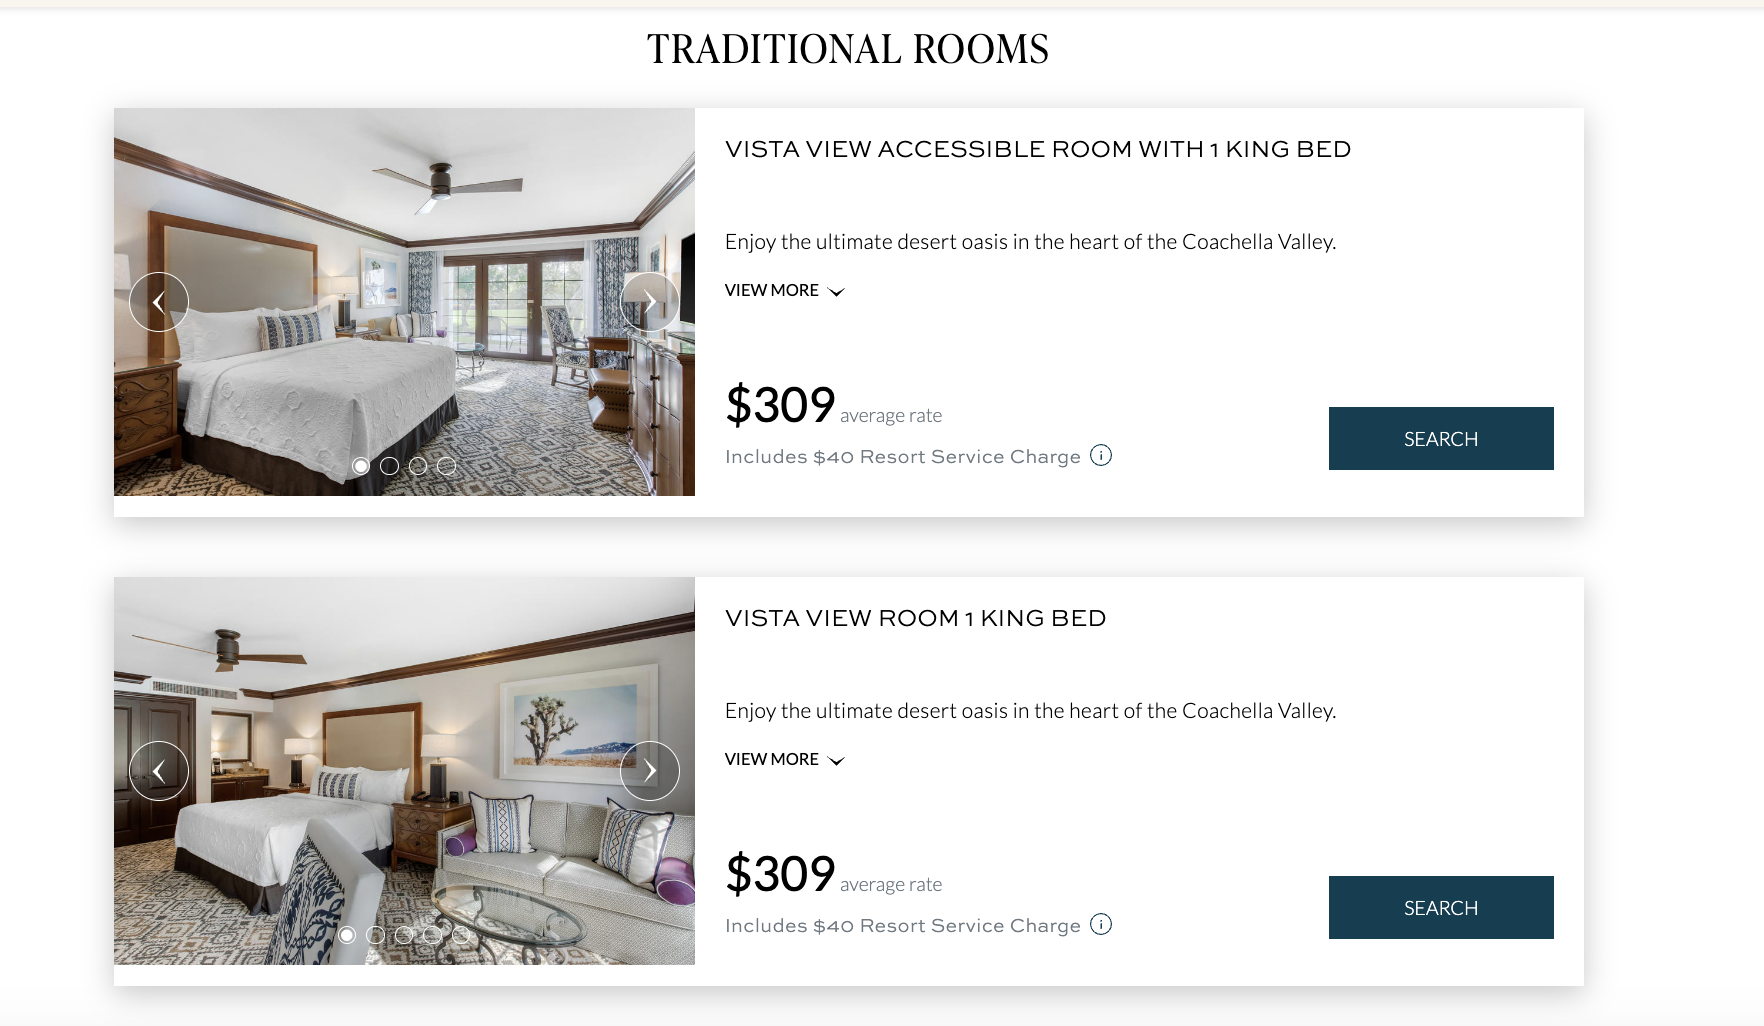 Hotel room interiors with one king bed, prices listed, and a search button for bookings, indicating options for travelers